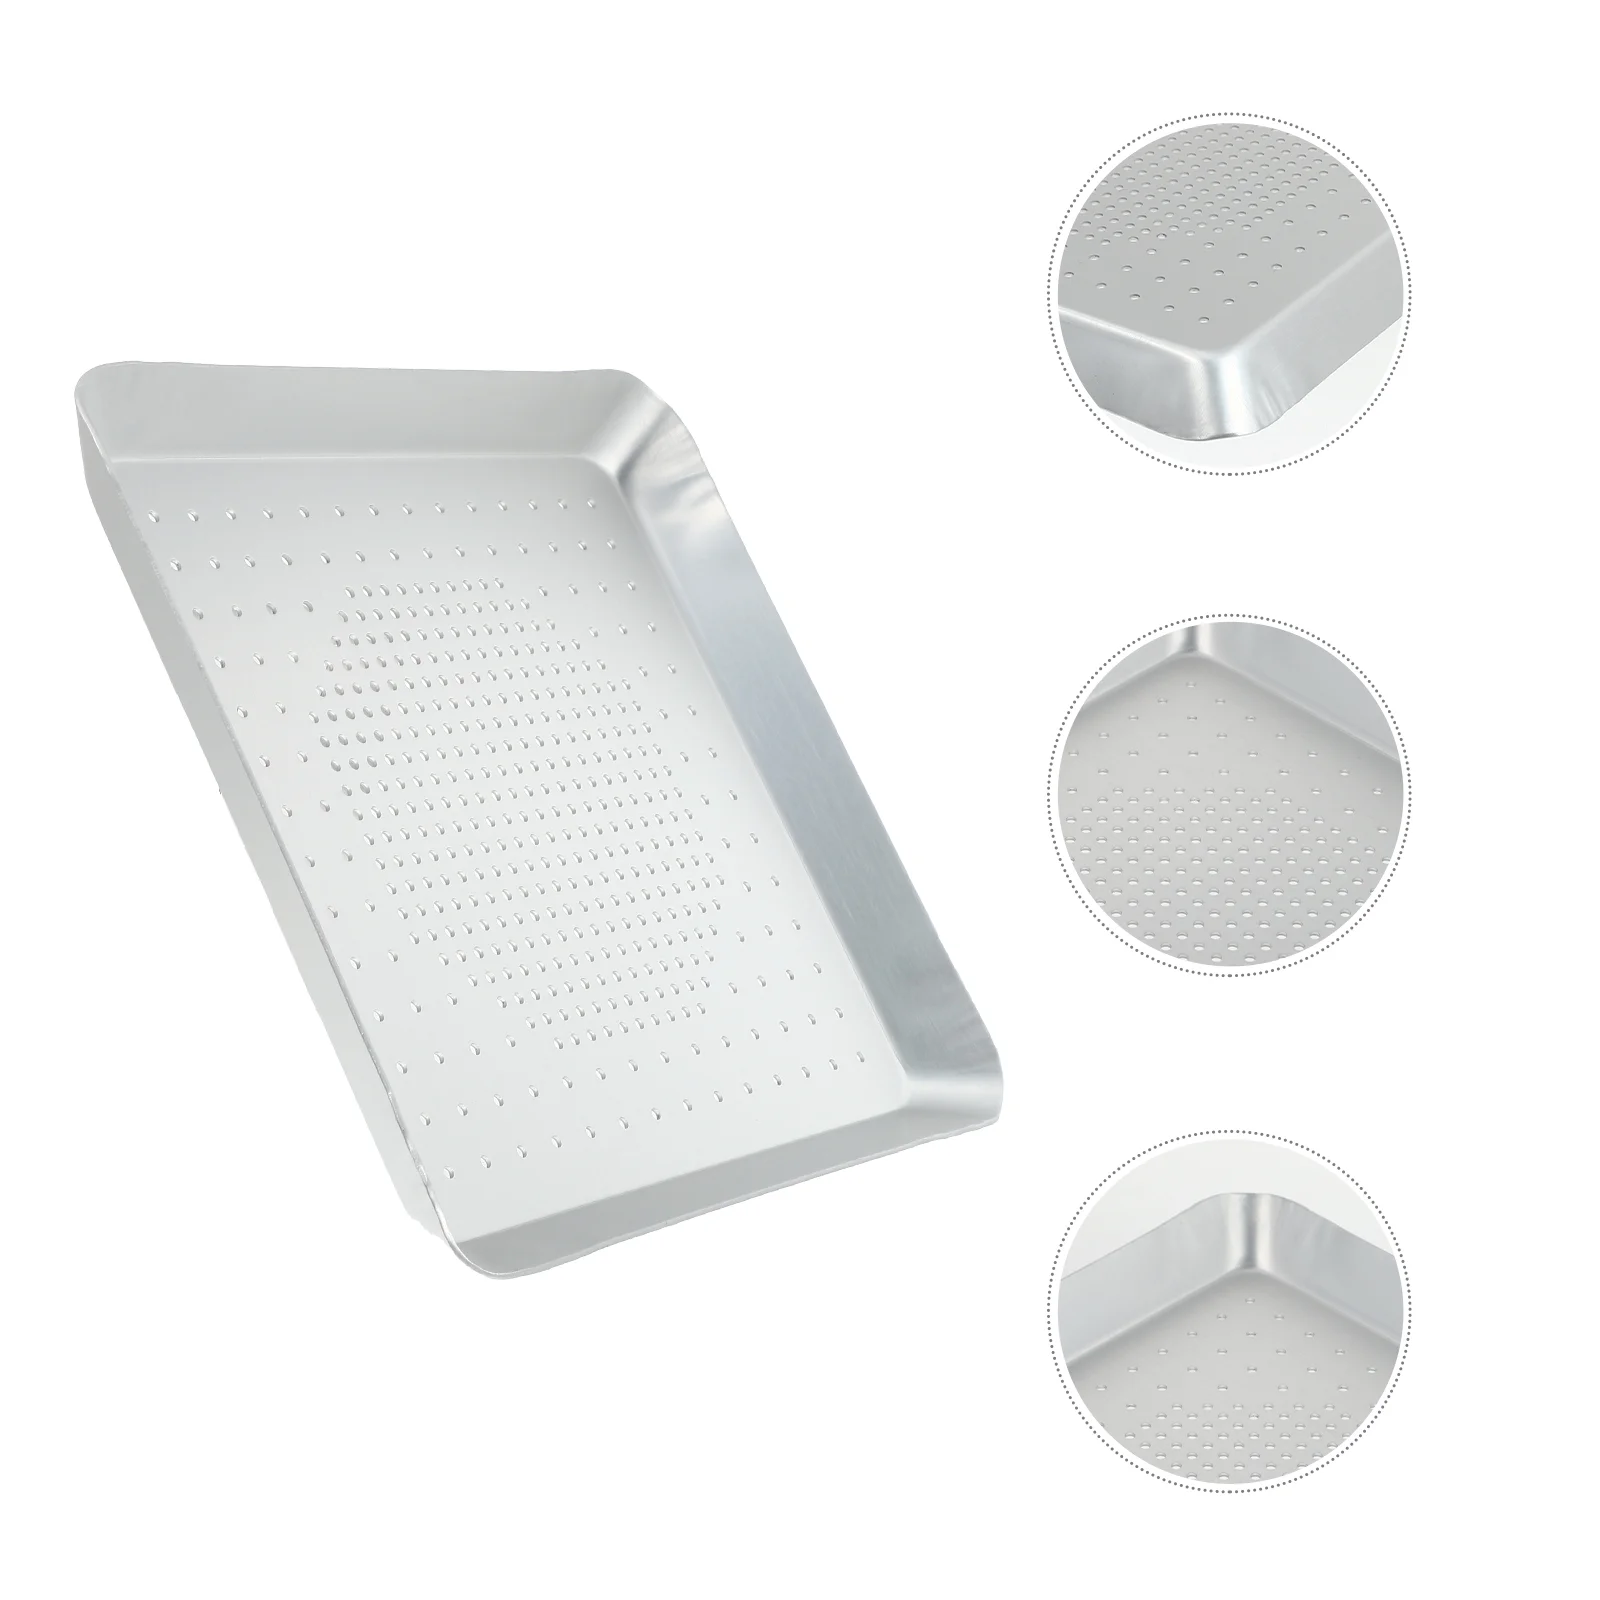 

Pizza Pan Tray Baking Oven Square Holes Non Stick Plate Crisper Cake Steel Pie Perforated Bakeware Sheet Stainless Round